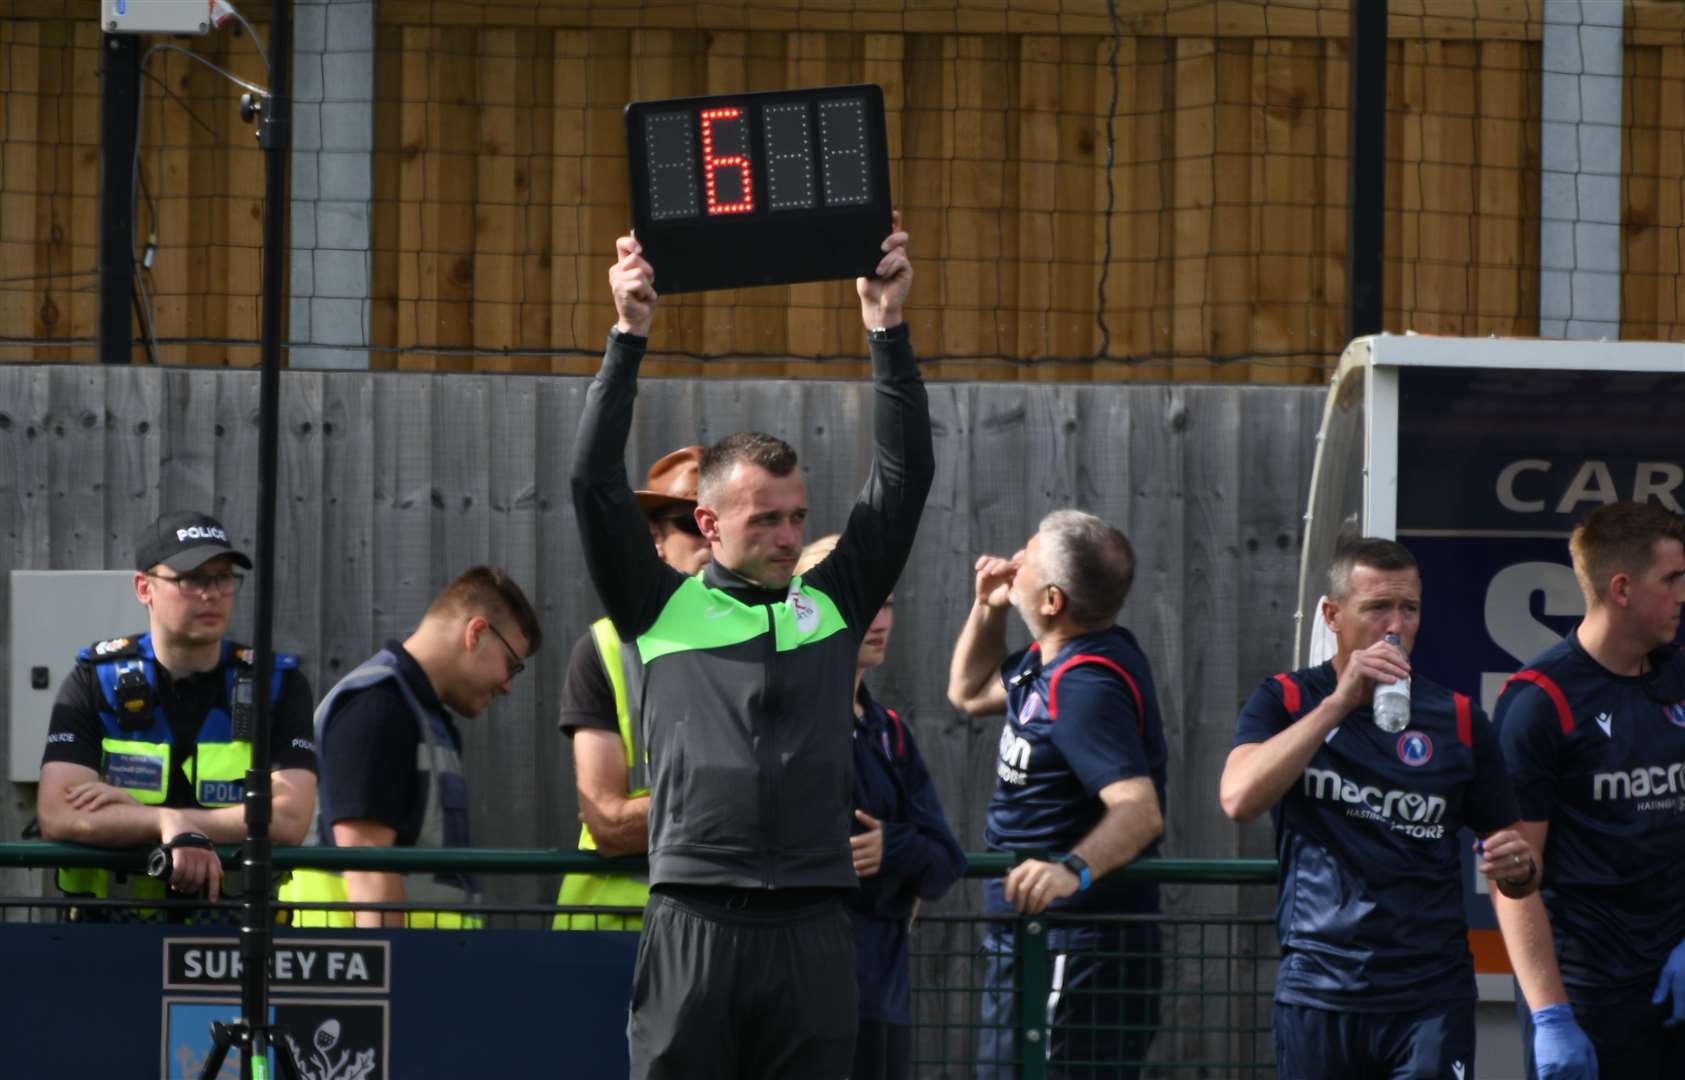 The fourth official indicates six minutes of stoppages at the end of 90 minutes. Picture: Barry Goodwin